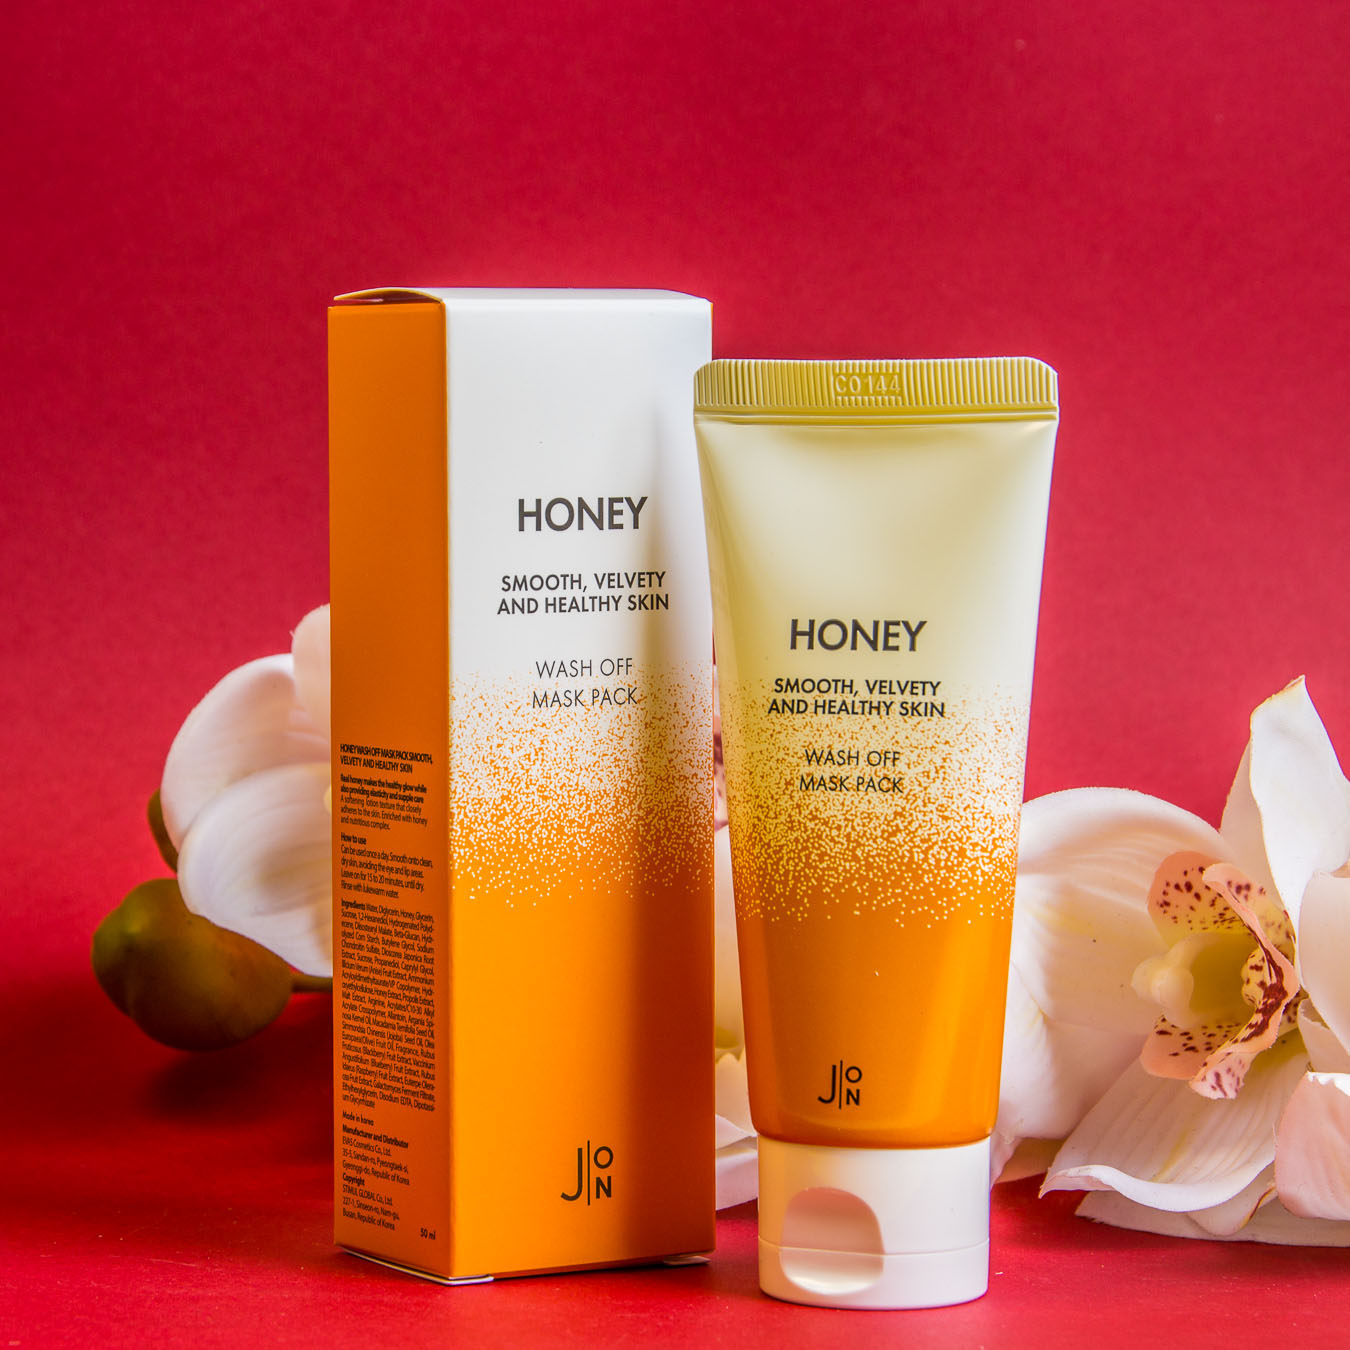 J:ON МЕД Маска для лица Honey Smooth Velvety and Healthy Skin Wash Off Mask Pack, 50 гр